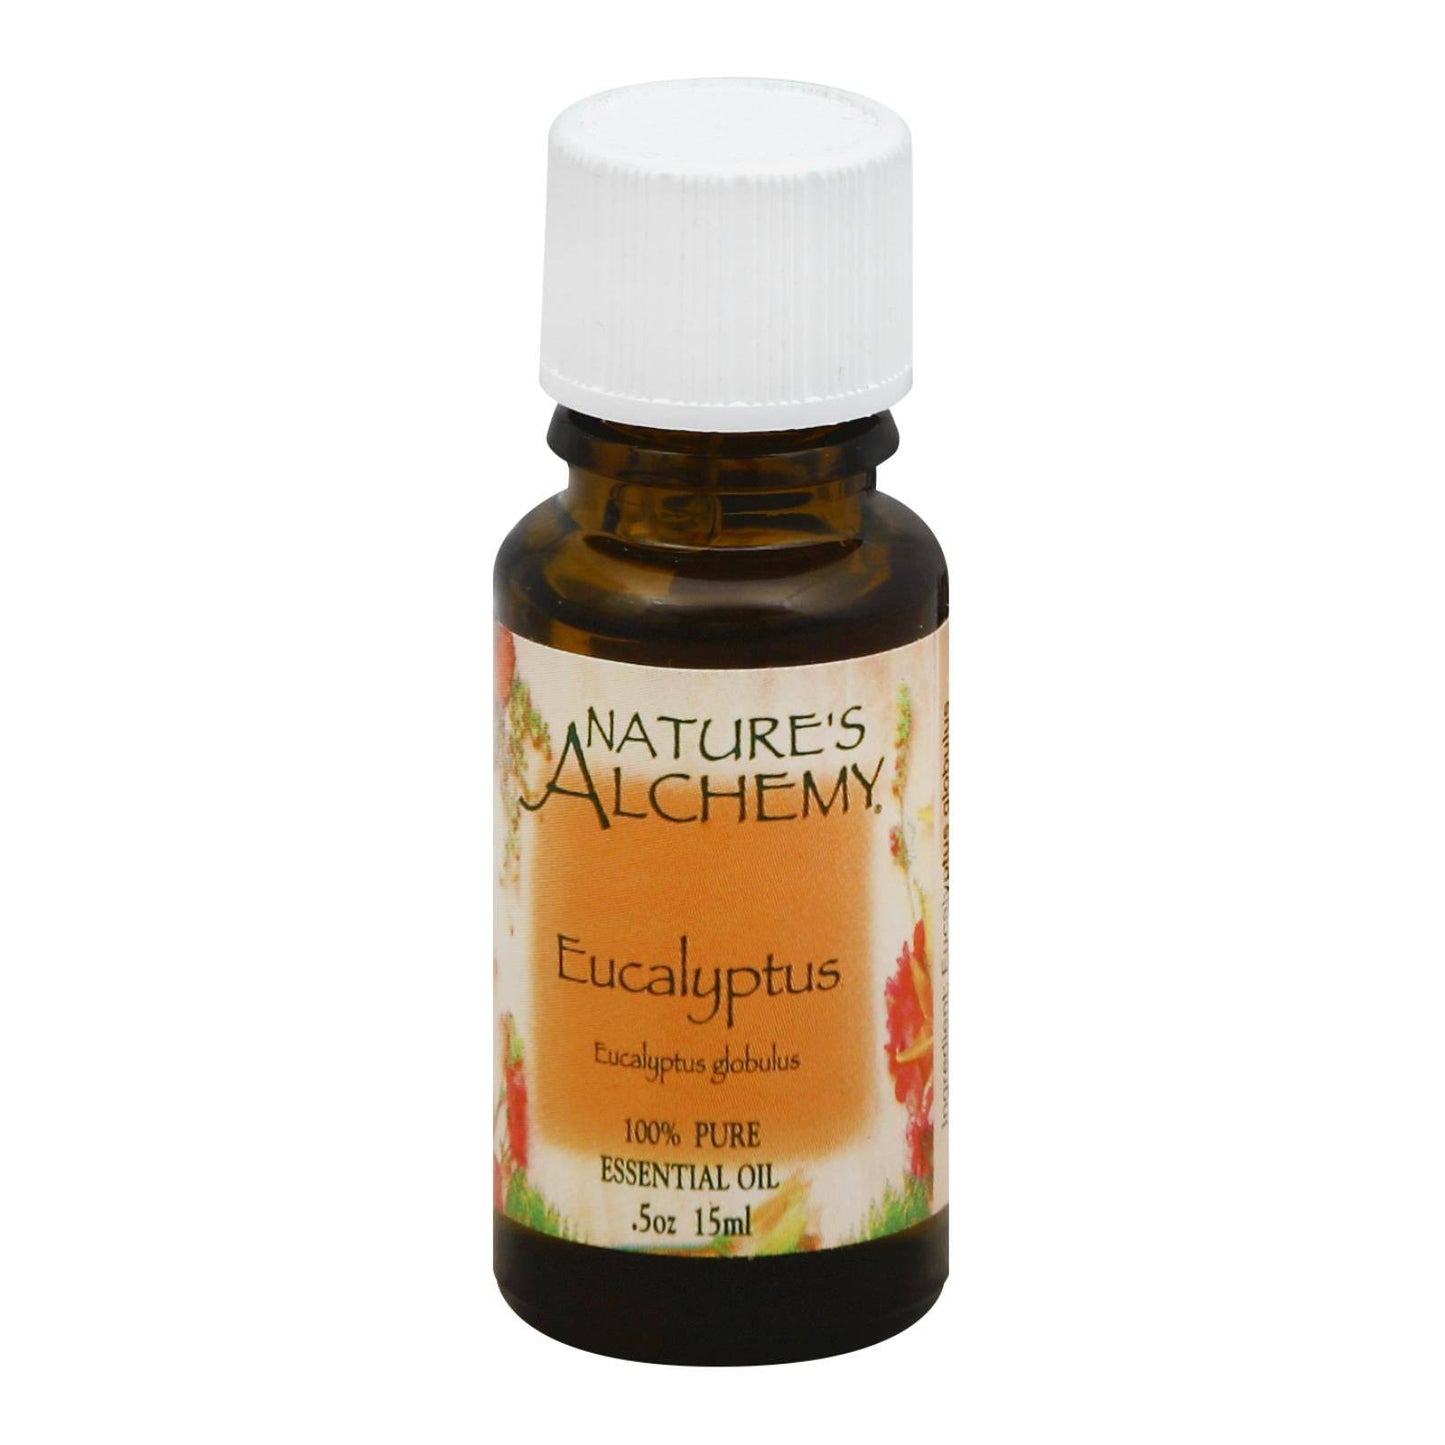 Buy Nature's Alchemy Essential Oil - Eucalyptus - .5 Oz  at OnlyNaturals.us